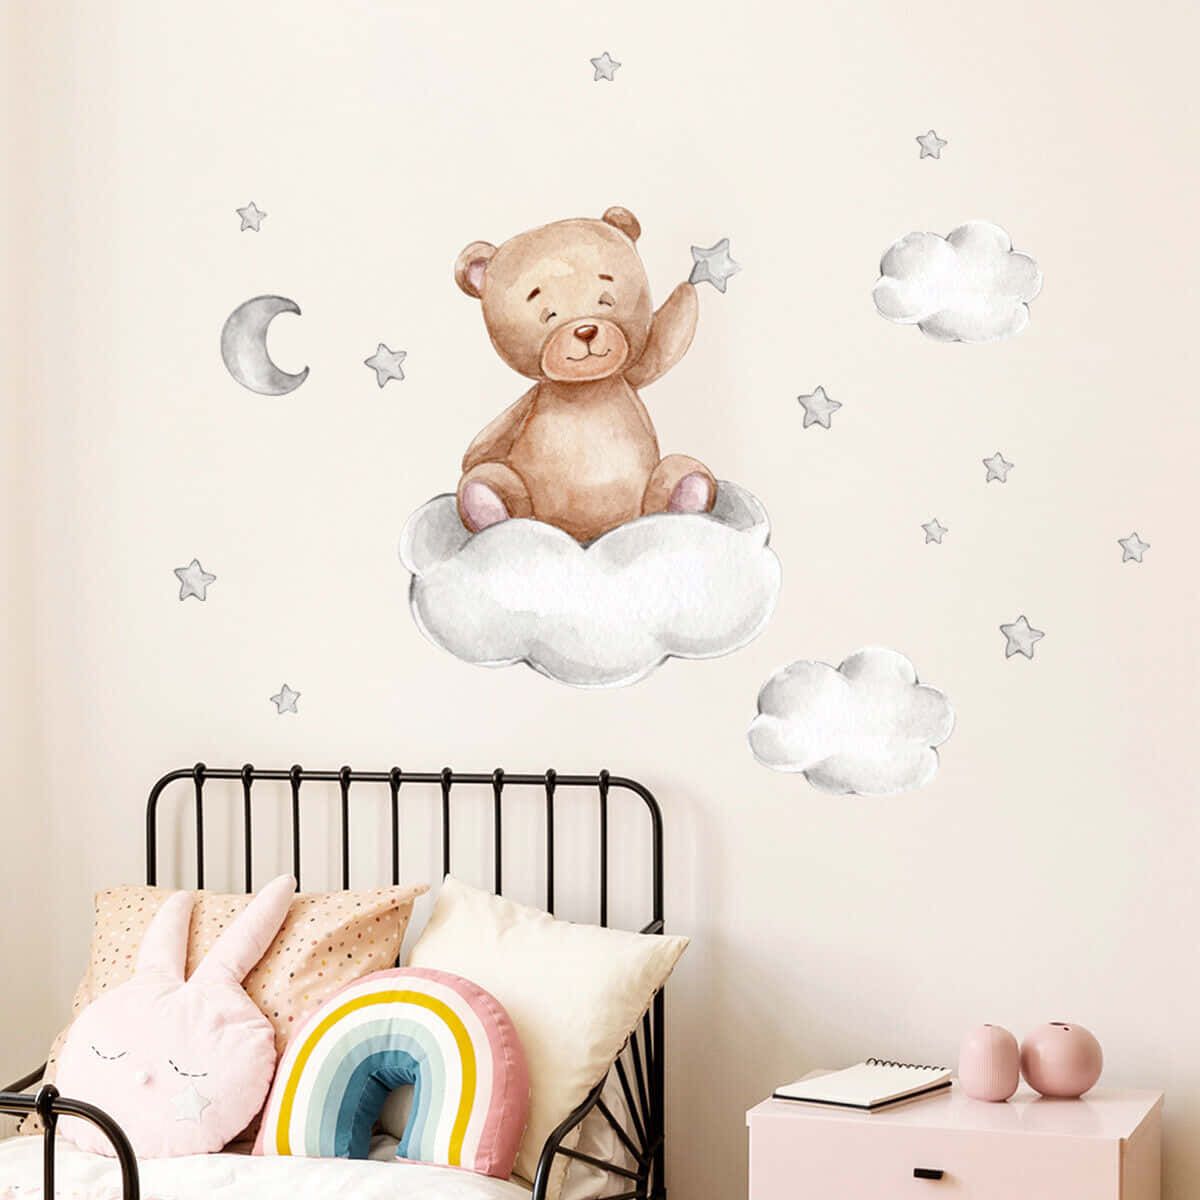 Adorable Kawaii Theme Room with Pastel Colors and Cute Decor Wallpaper